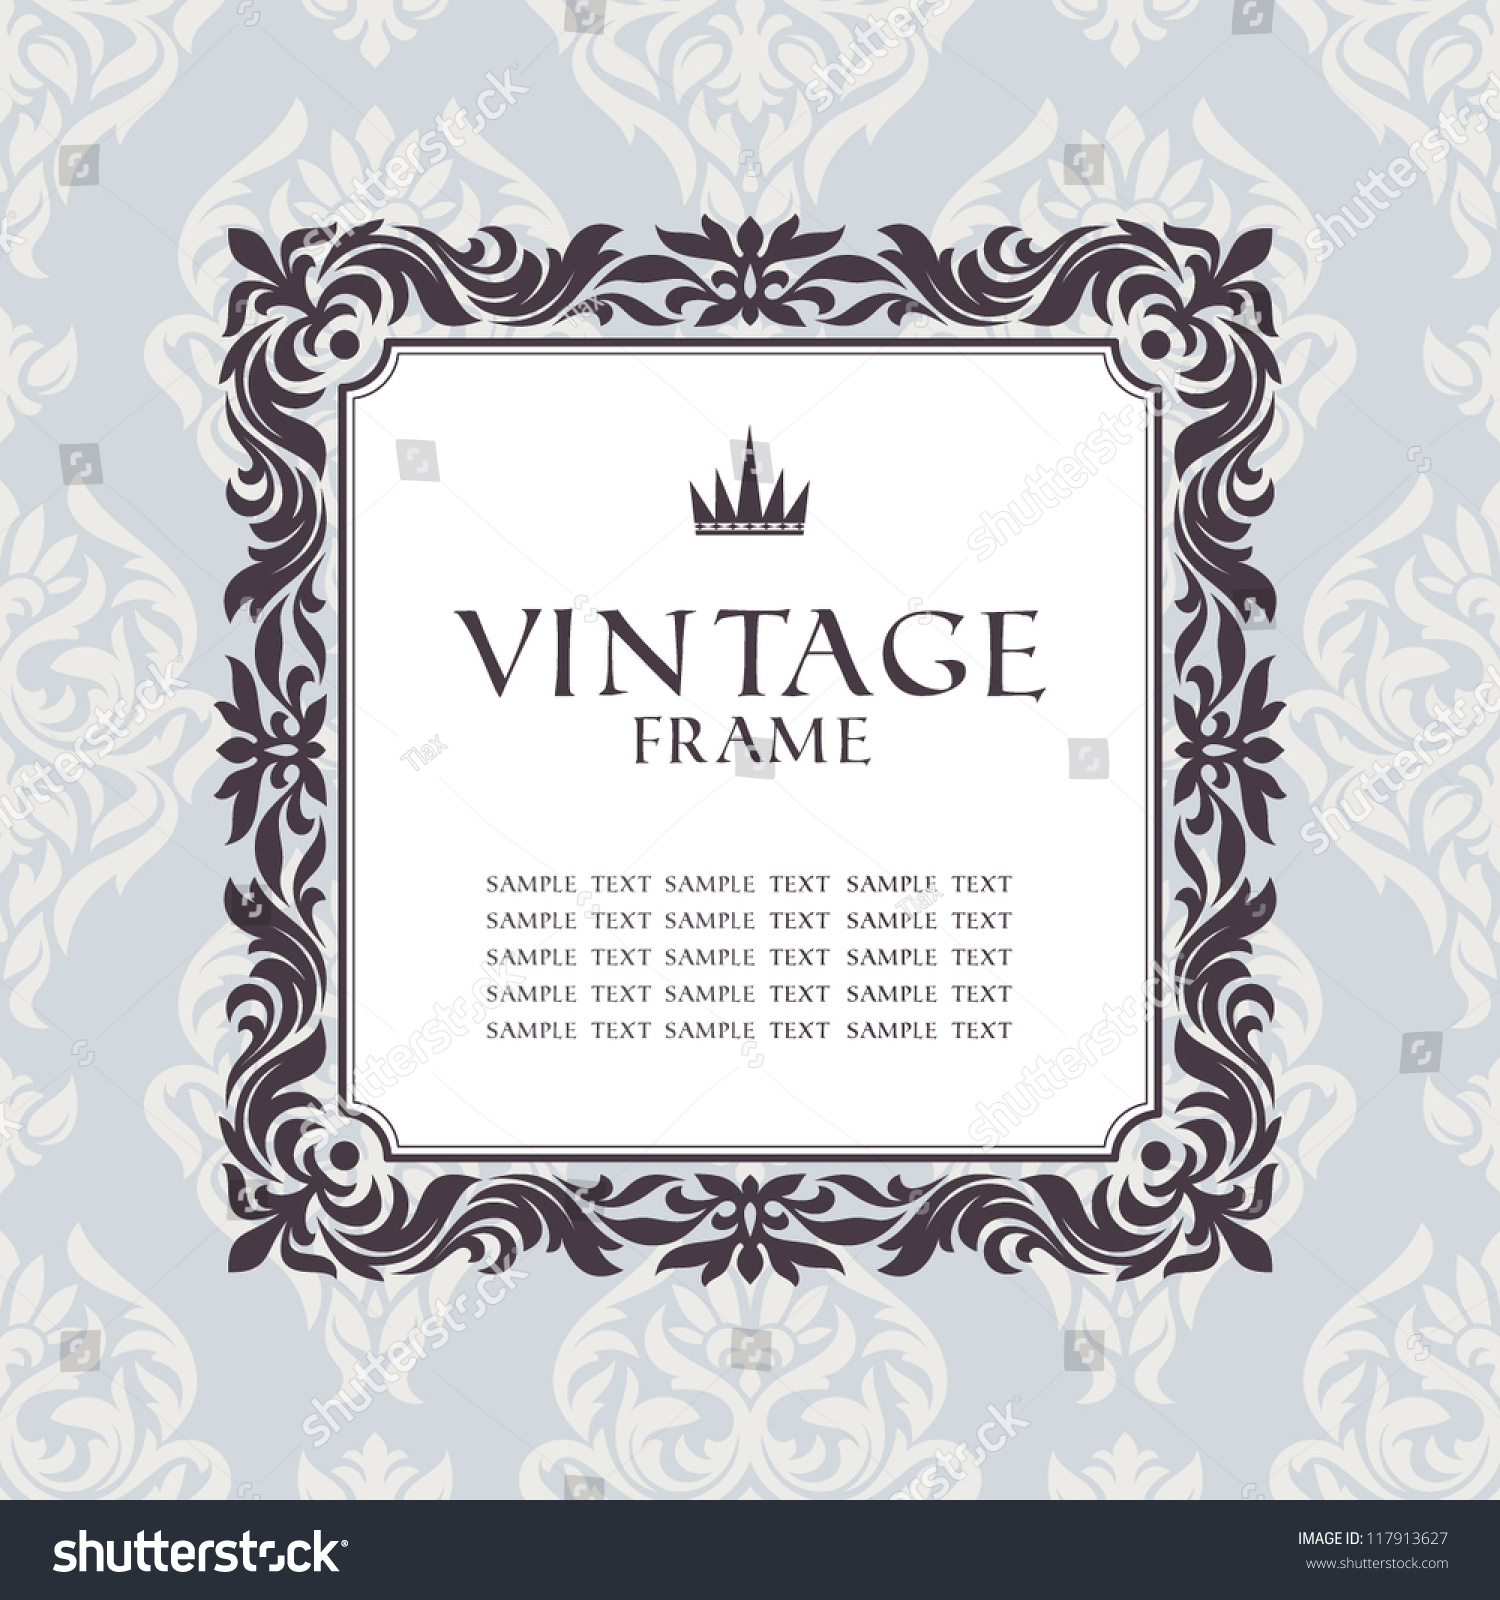 Abstract Vintage Frame Vector Illustration Stock Vector 117913627 ...